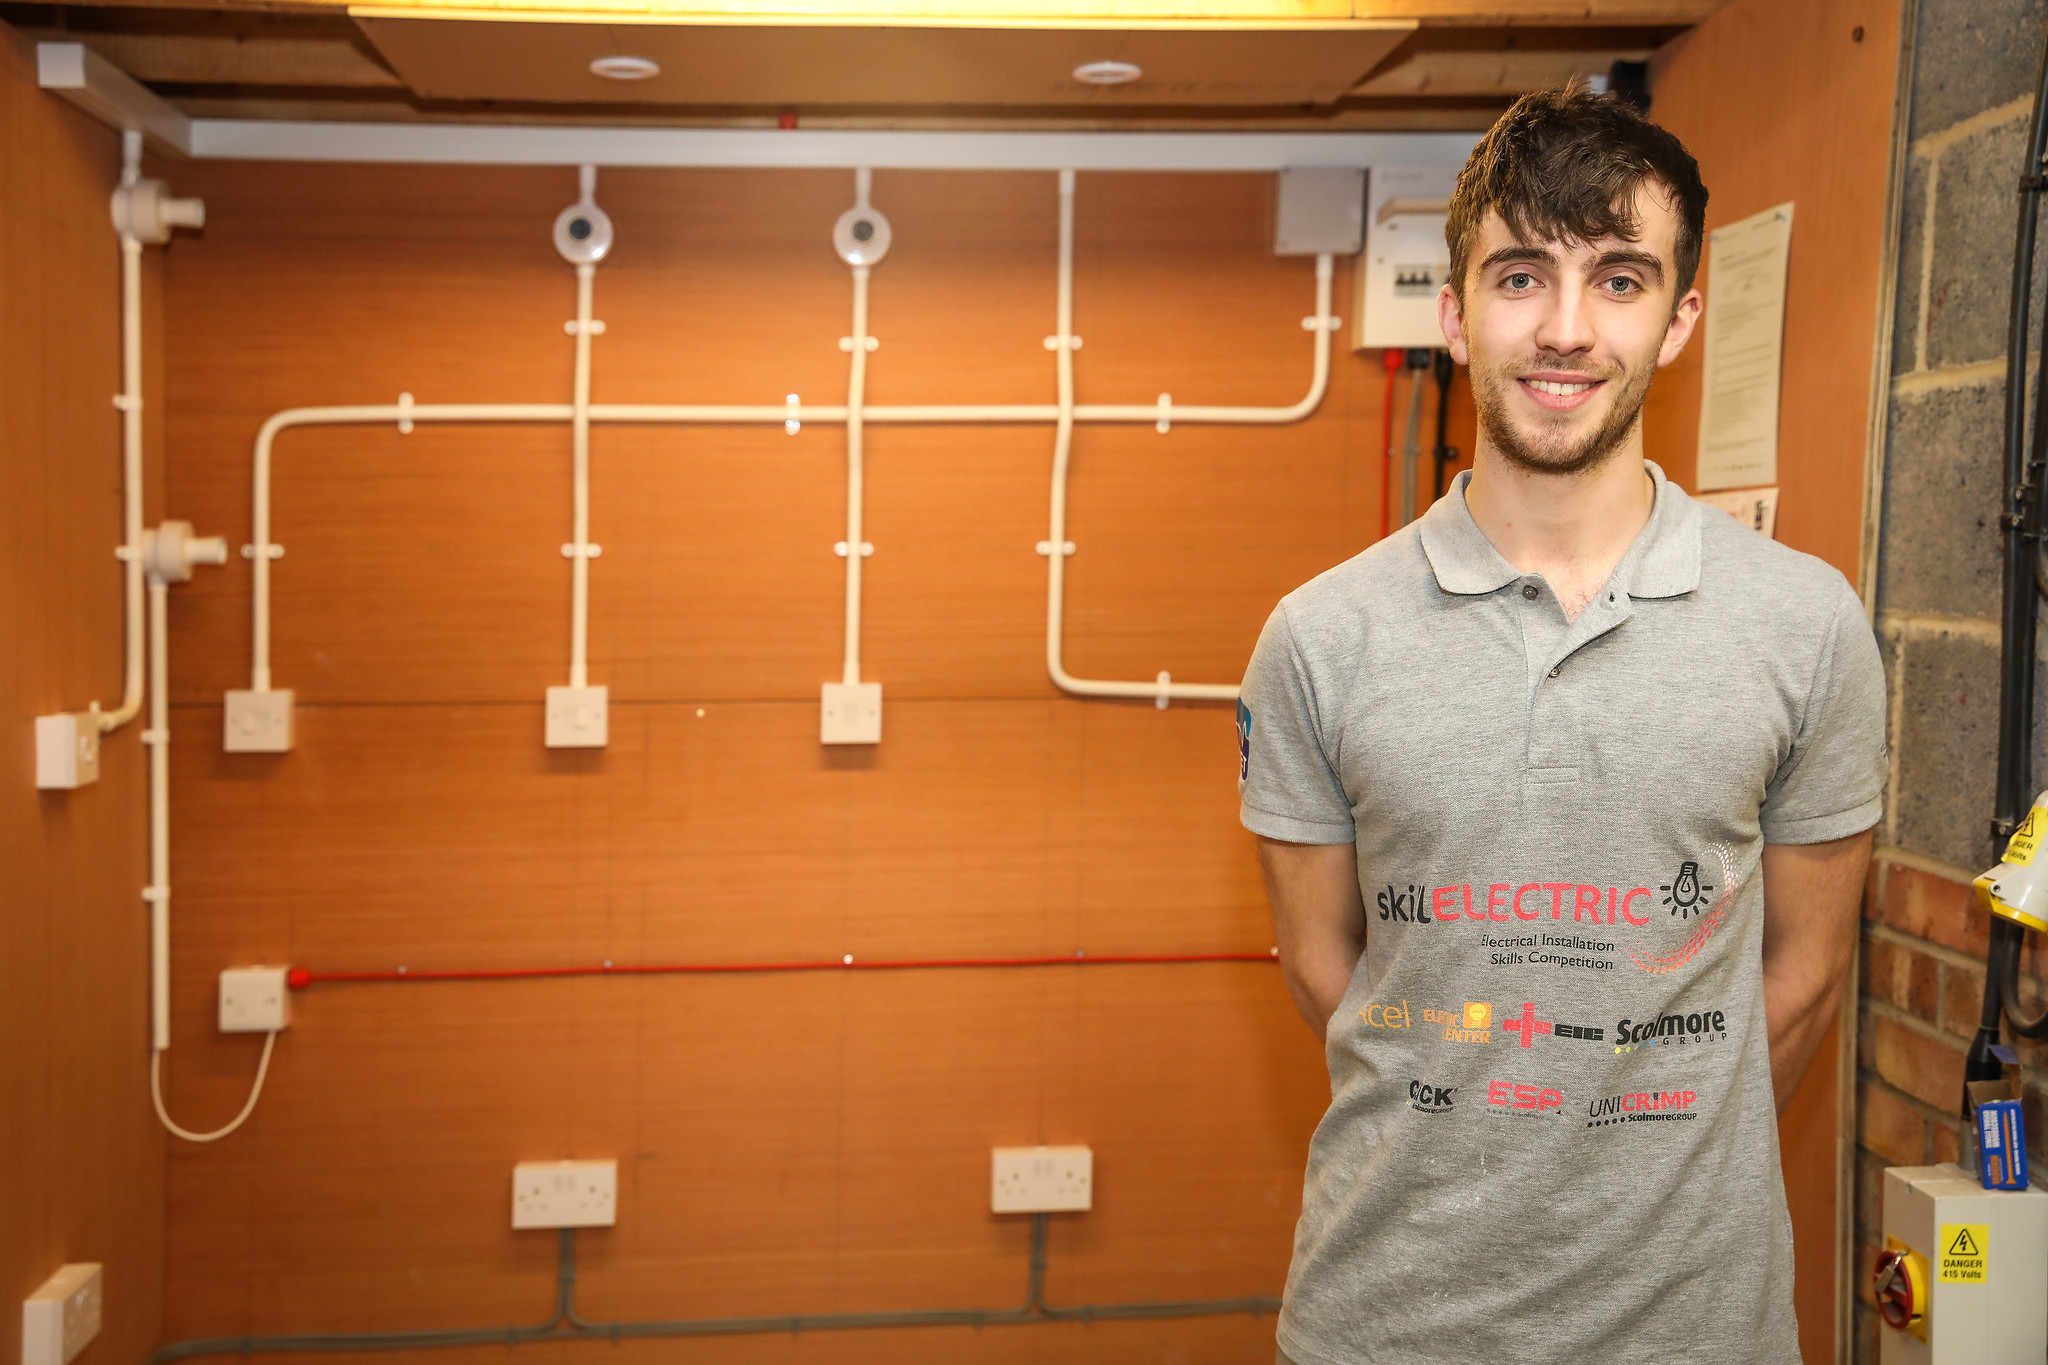 Scottish electrical apprentices take gold and silver in UK event